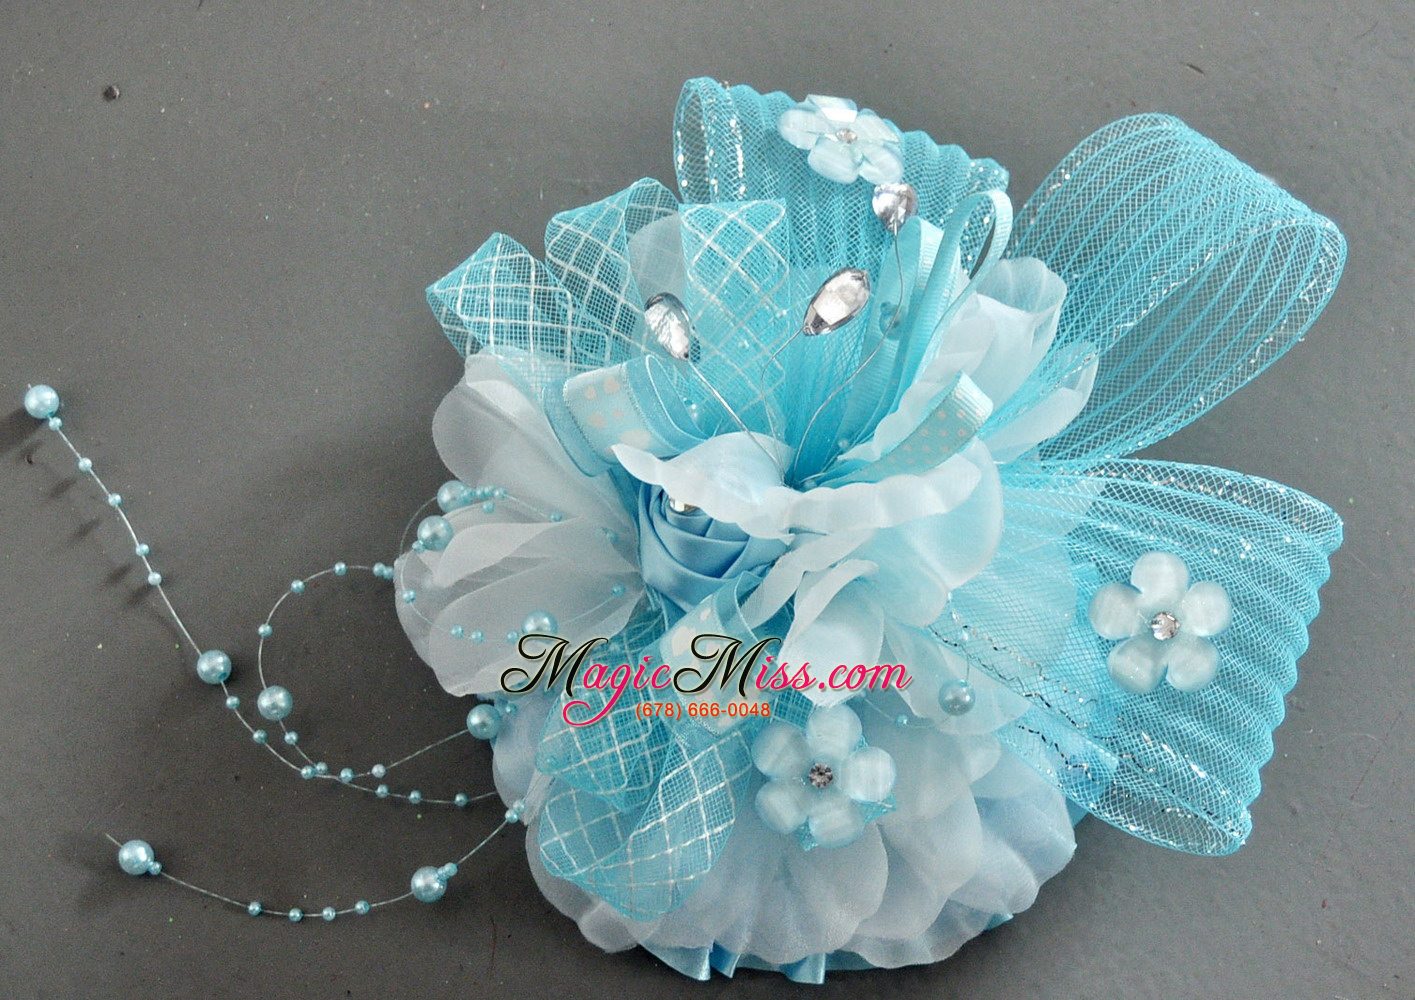 wholesale tulle aqua blue fully handmade headpices with rhinestones and flowers decorate for party